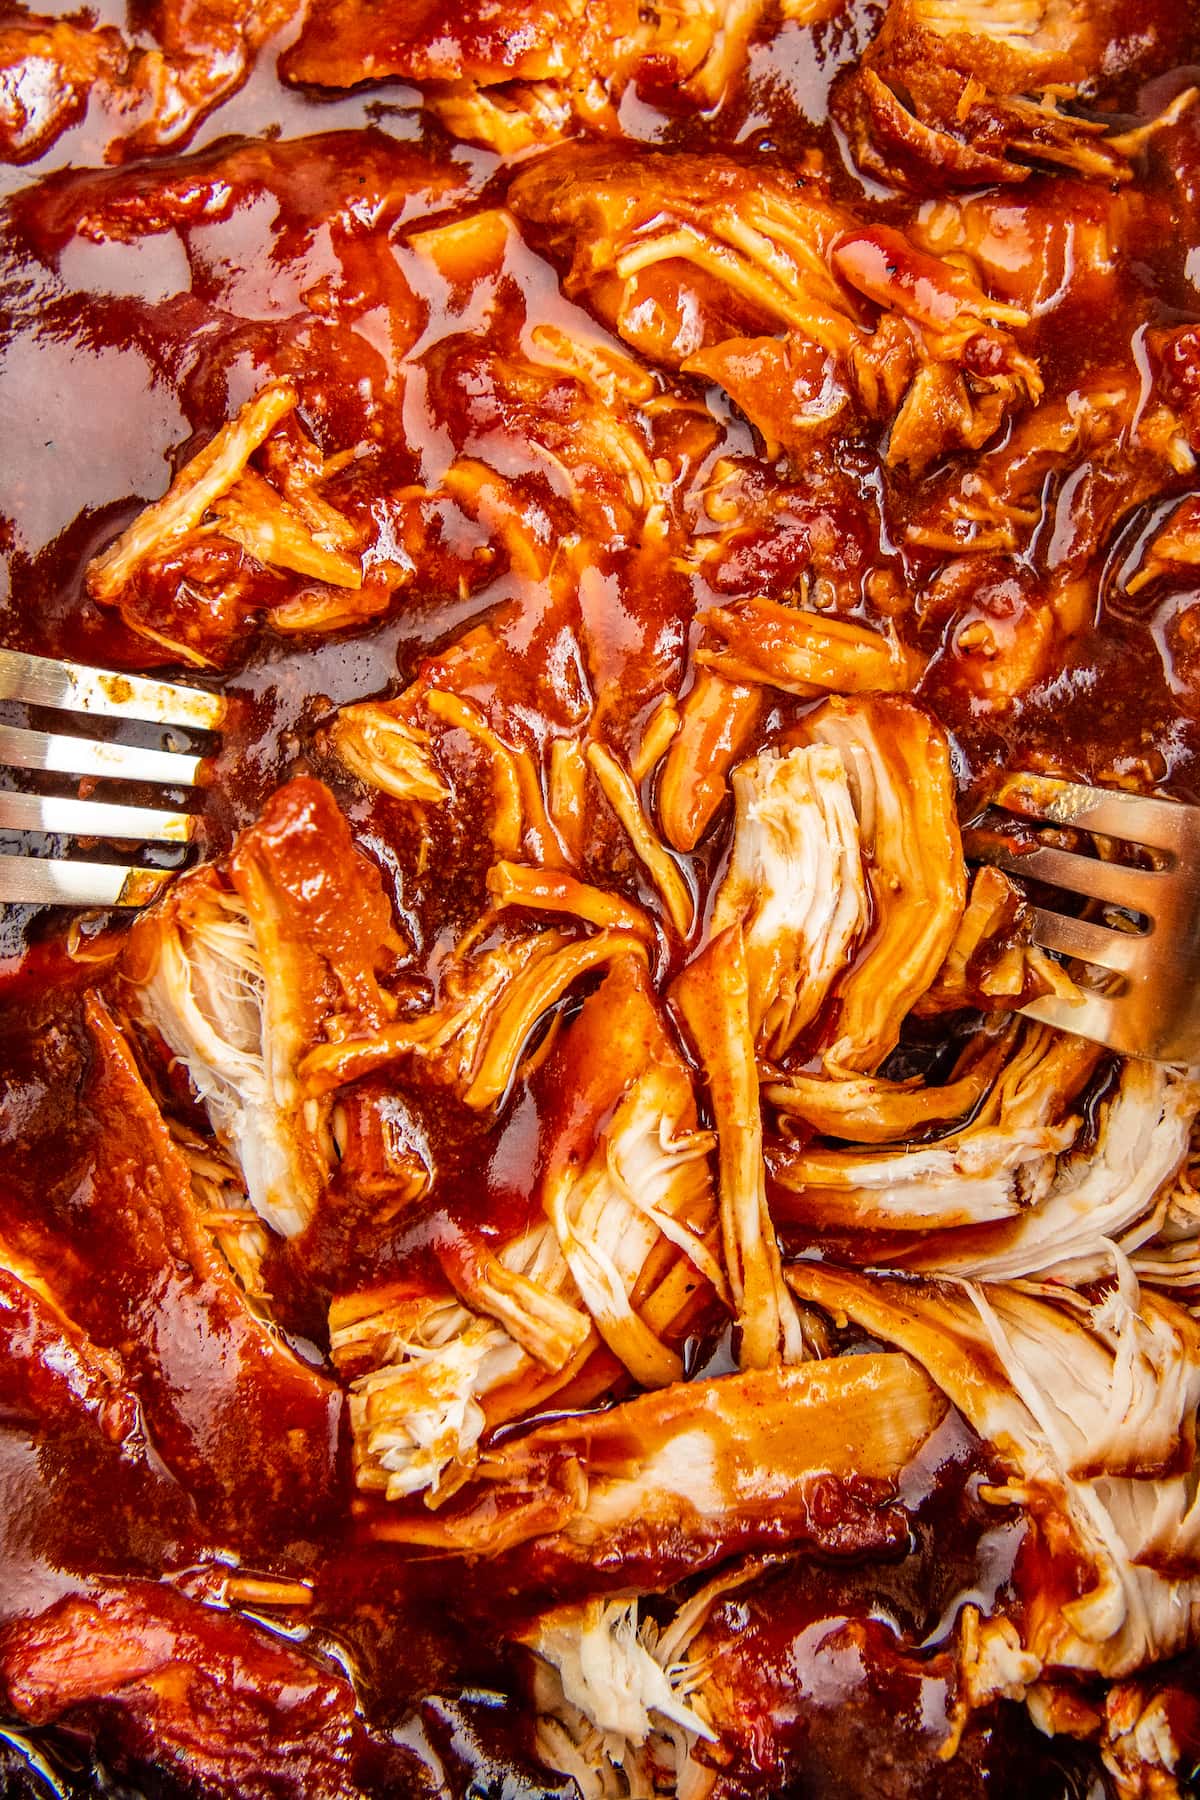 Chicken breasts shredded in bbq sauce with two forks inside a crockpot.